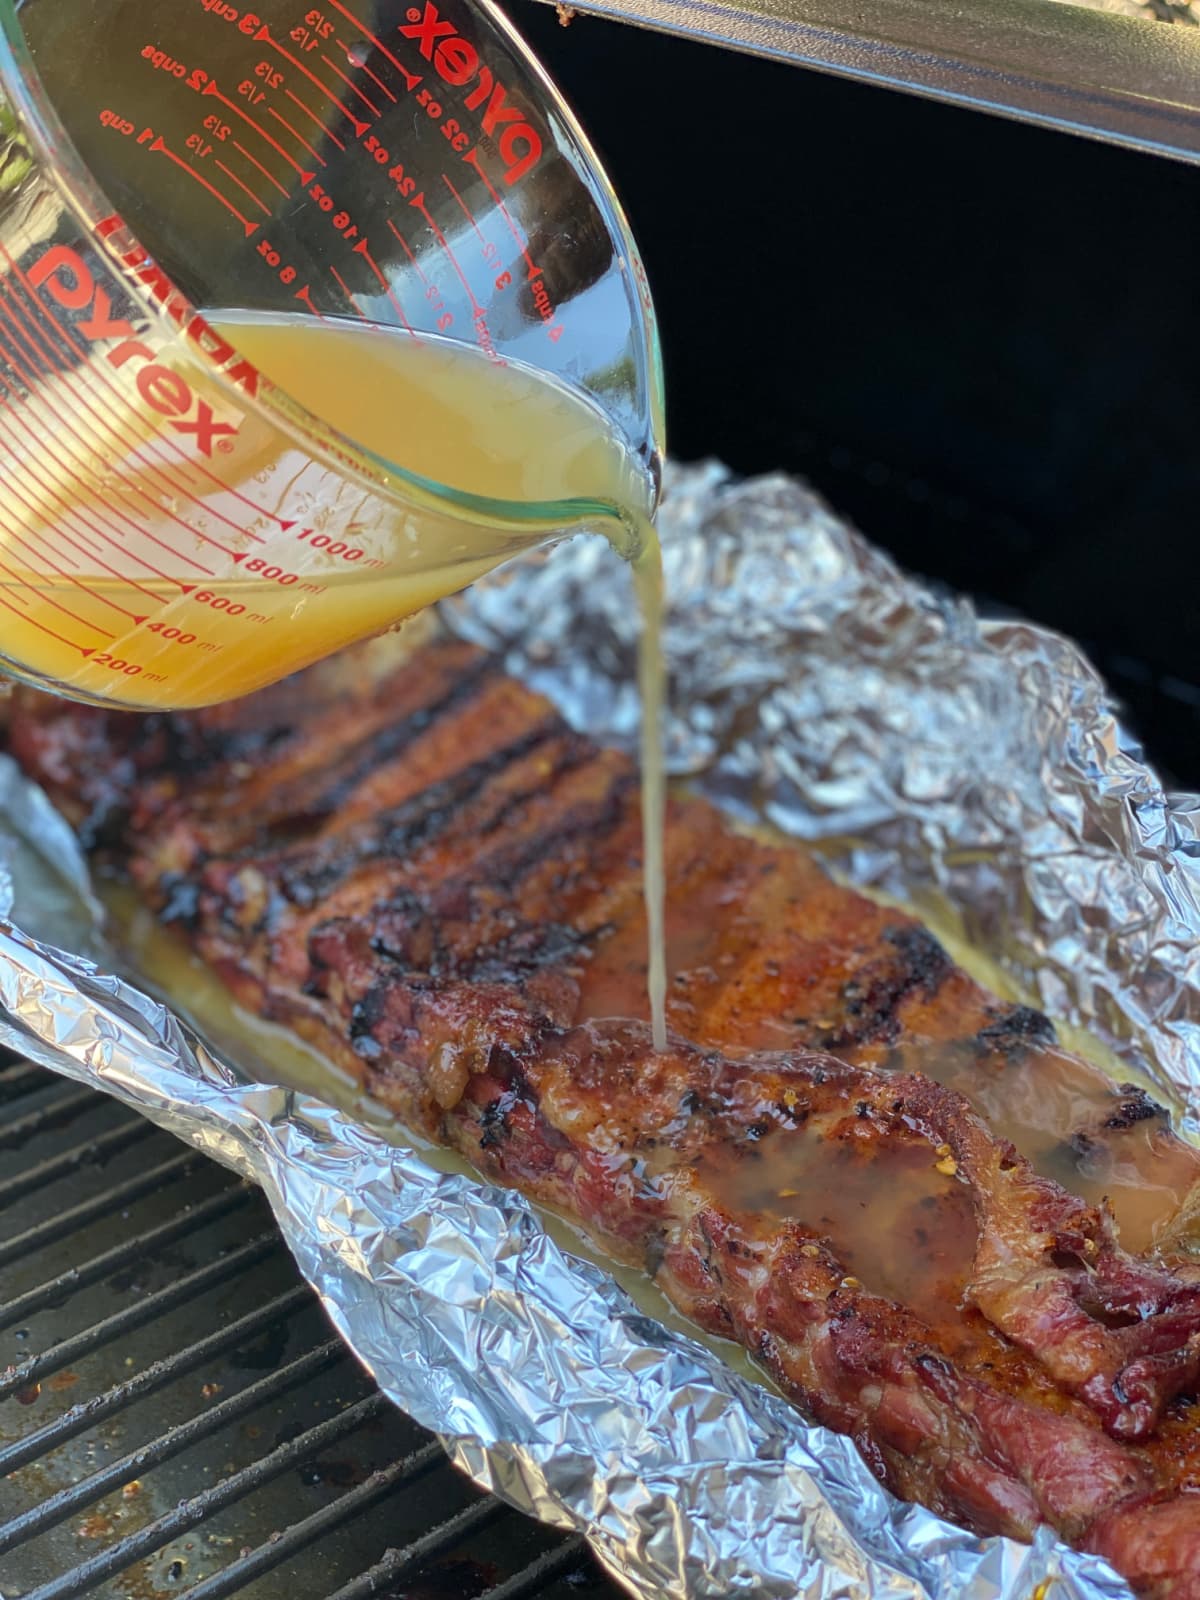 Smoked Ribs in Foil with Apple Juice being poured on top